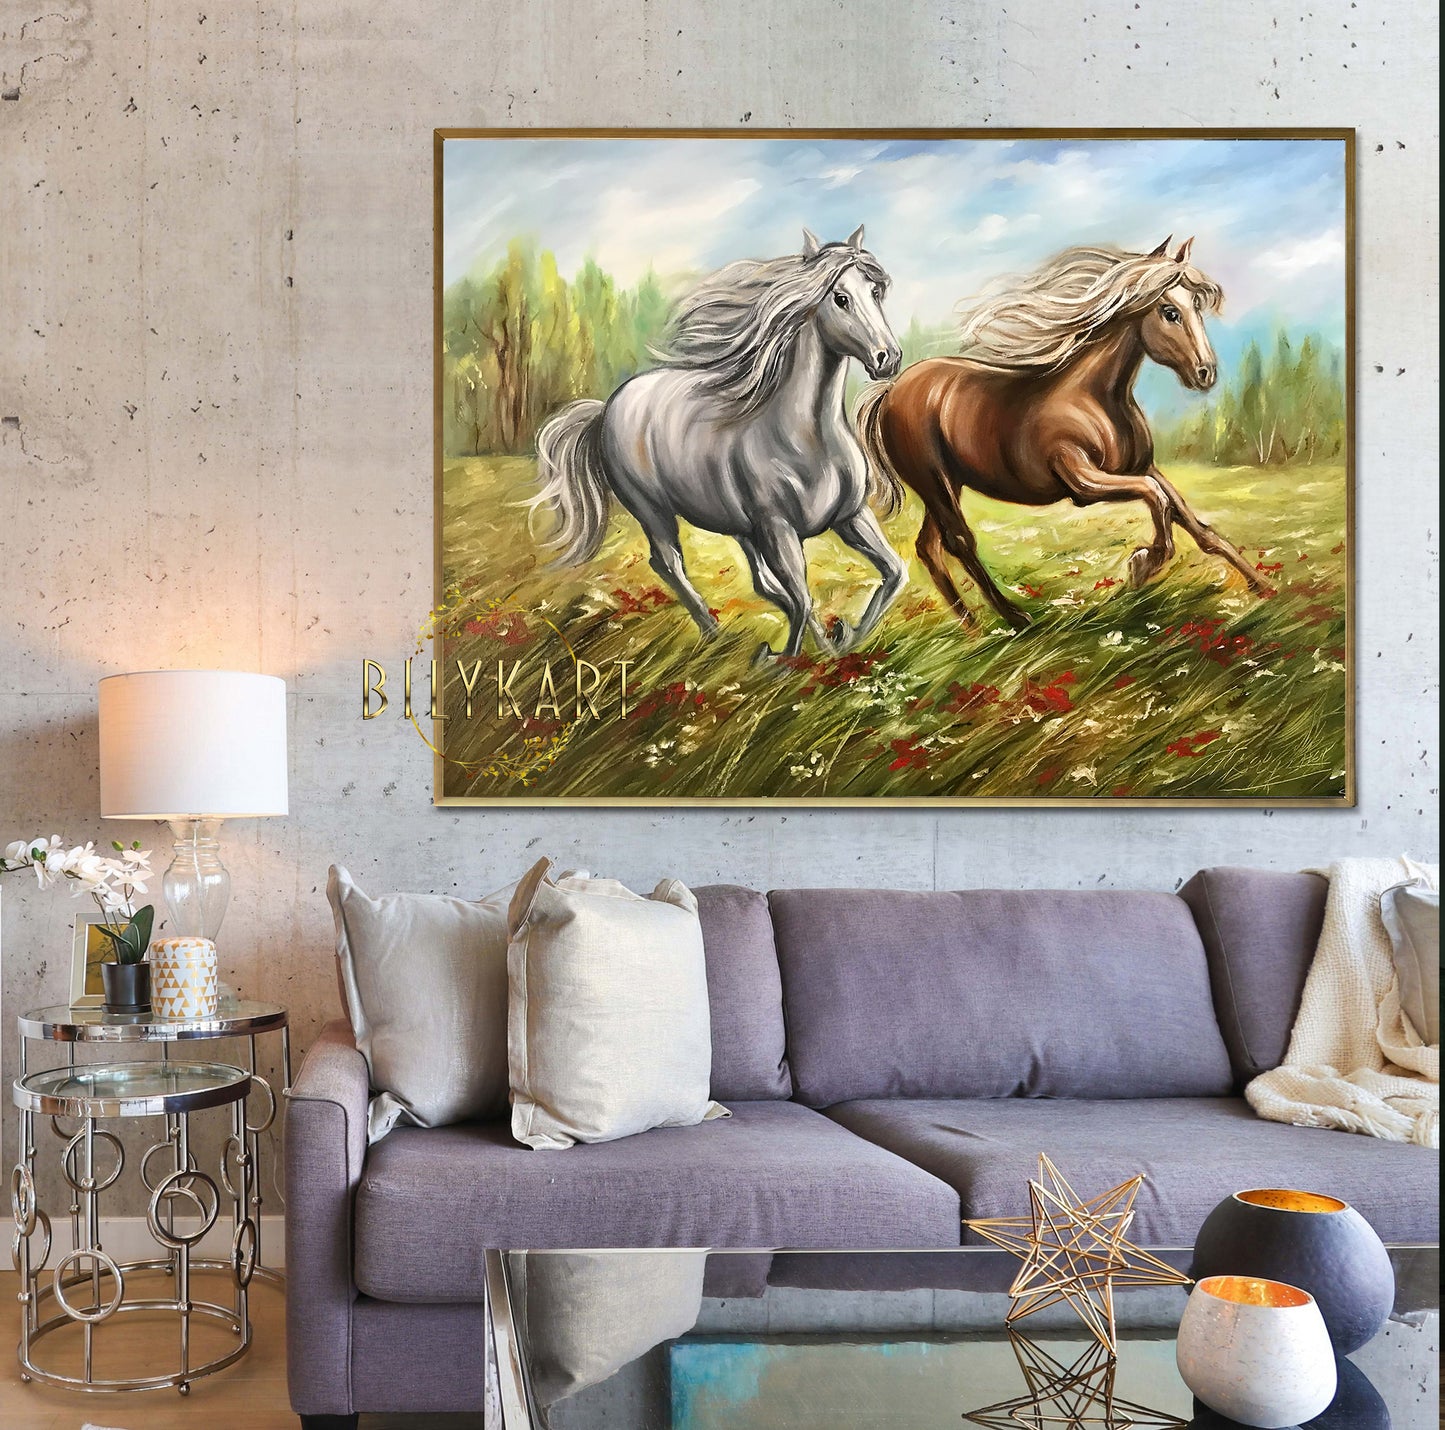 2 Running Horses Oil Painting on Canvas Wild Animal Wall Art Brown and White Horse Painting